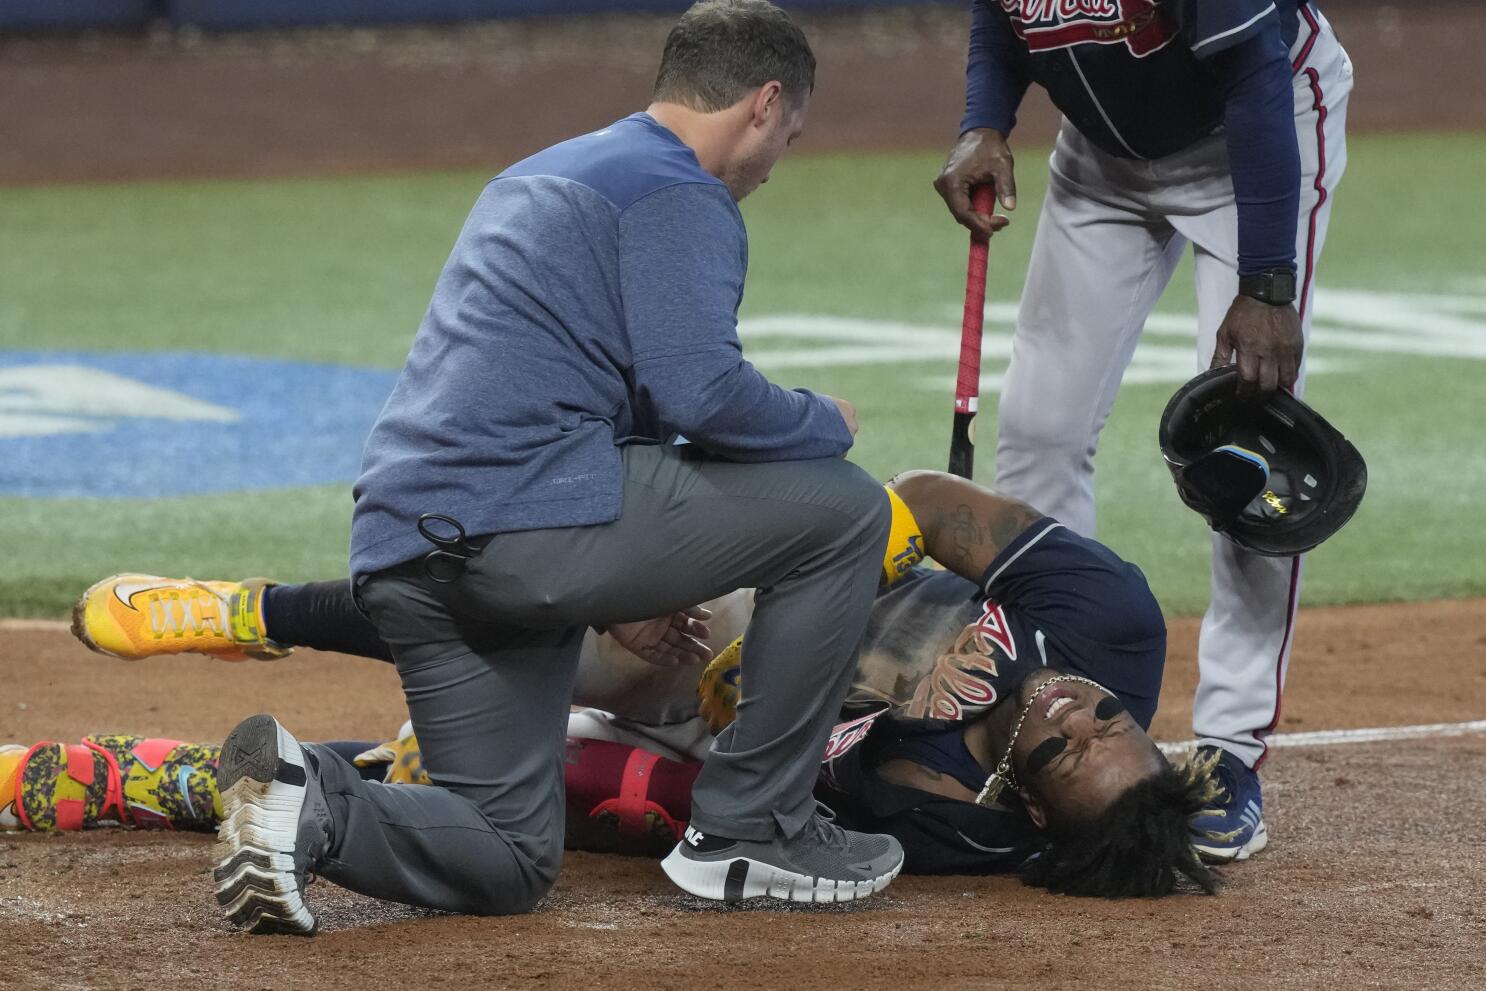 Ronald Acuna Jr. injury update: Braves OF exits game after being